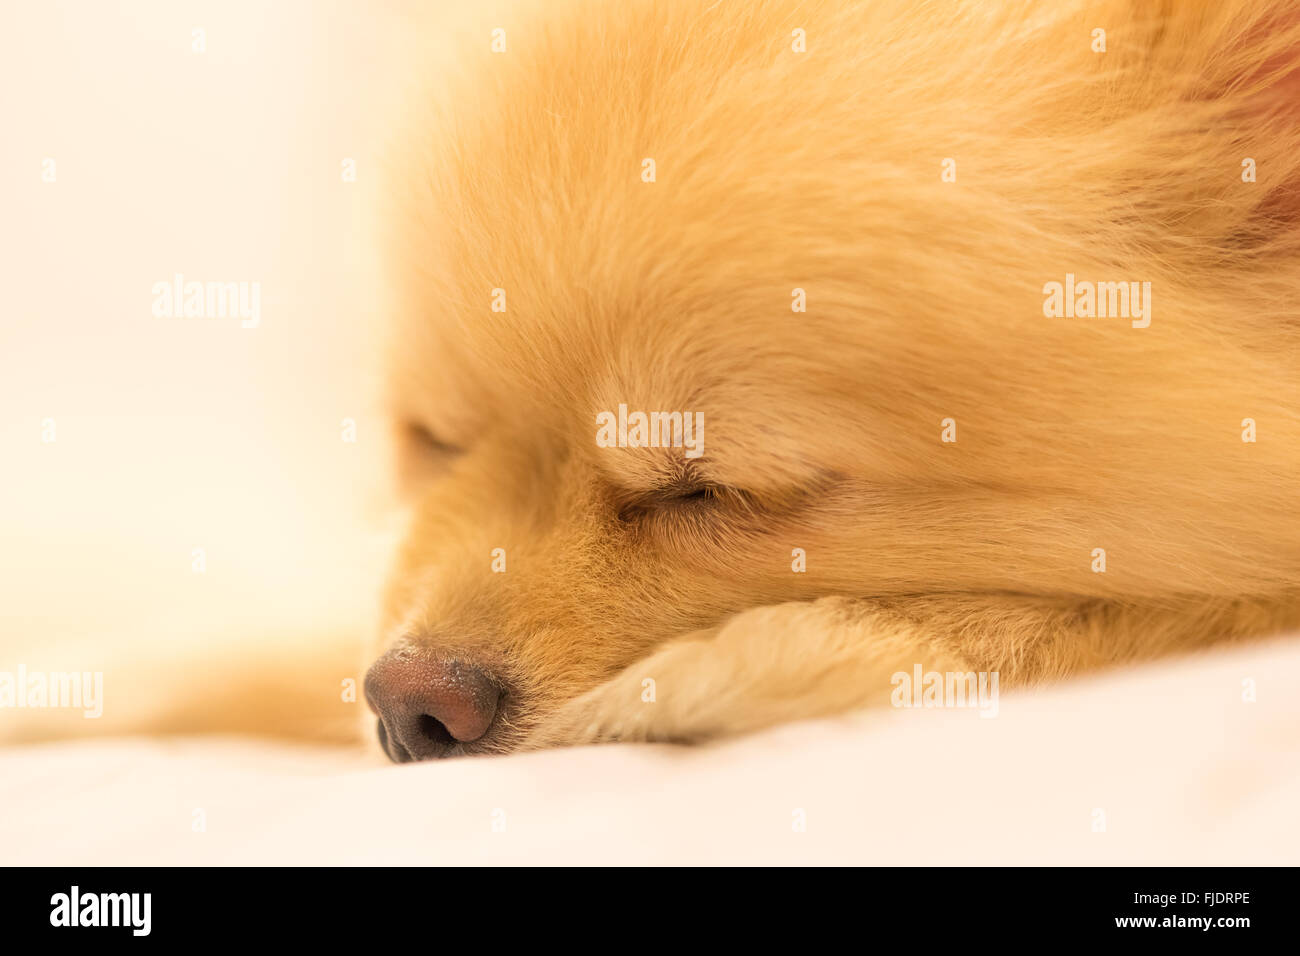 Pomeranian dog having sweet dream, focus on the eye, with copy space Stock Photo